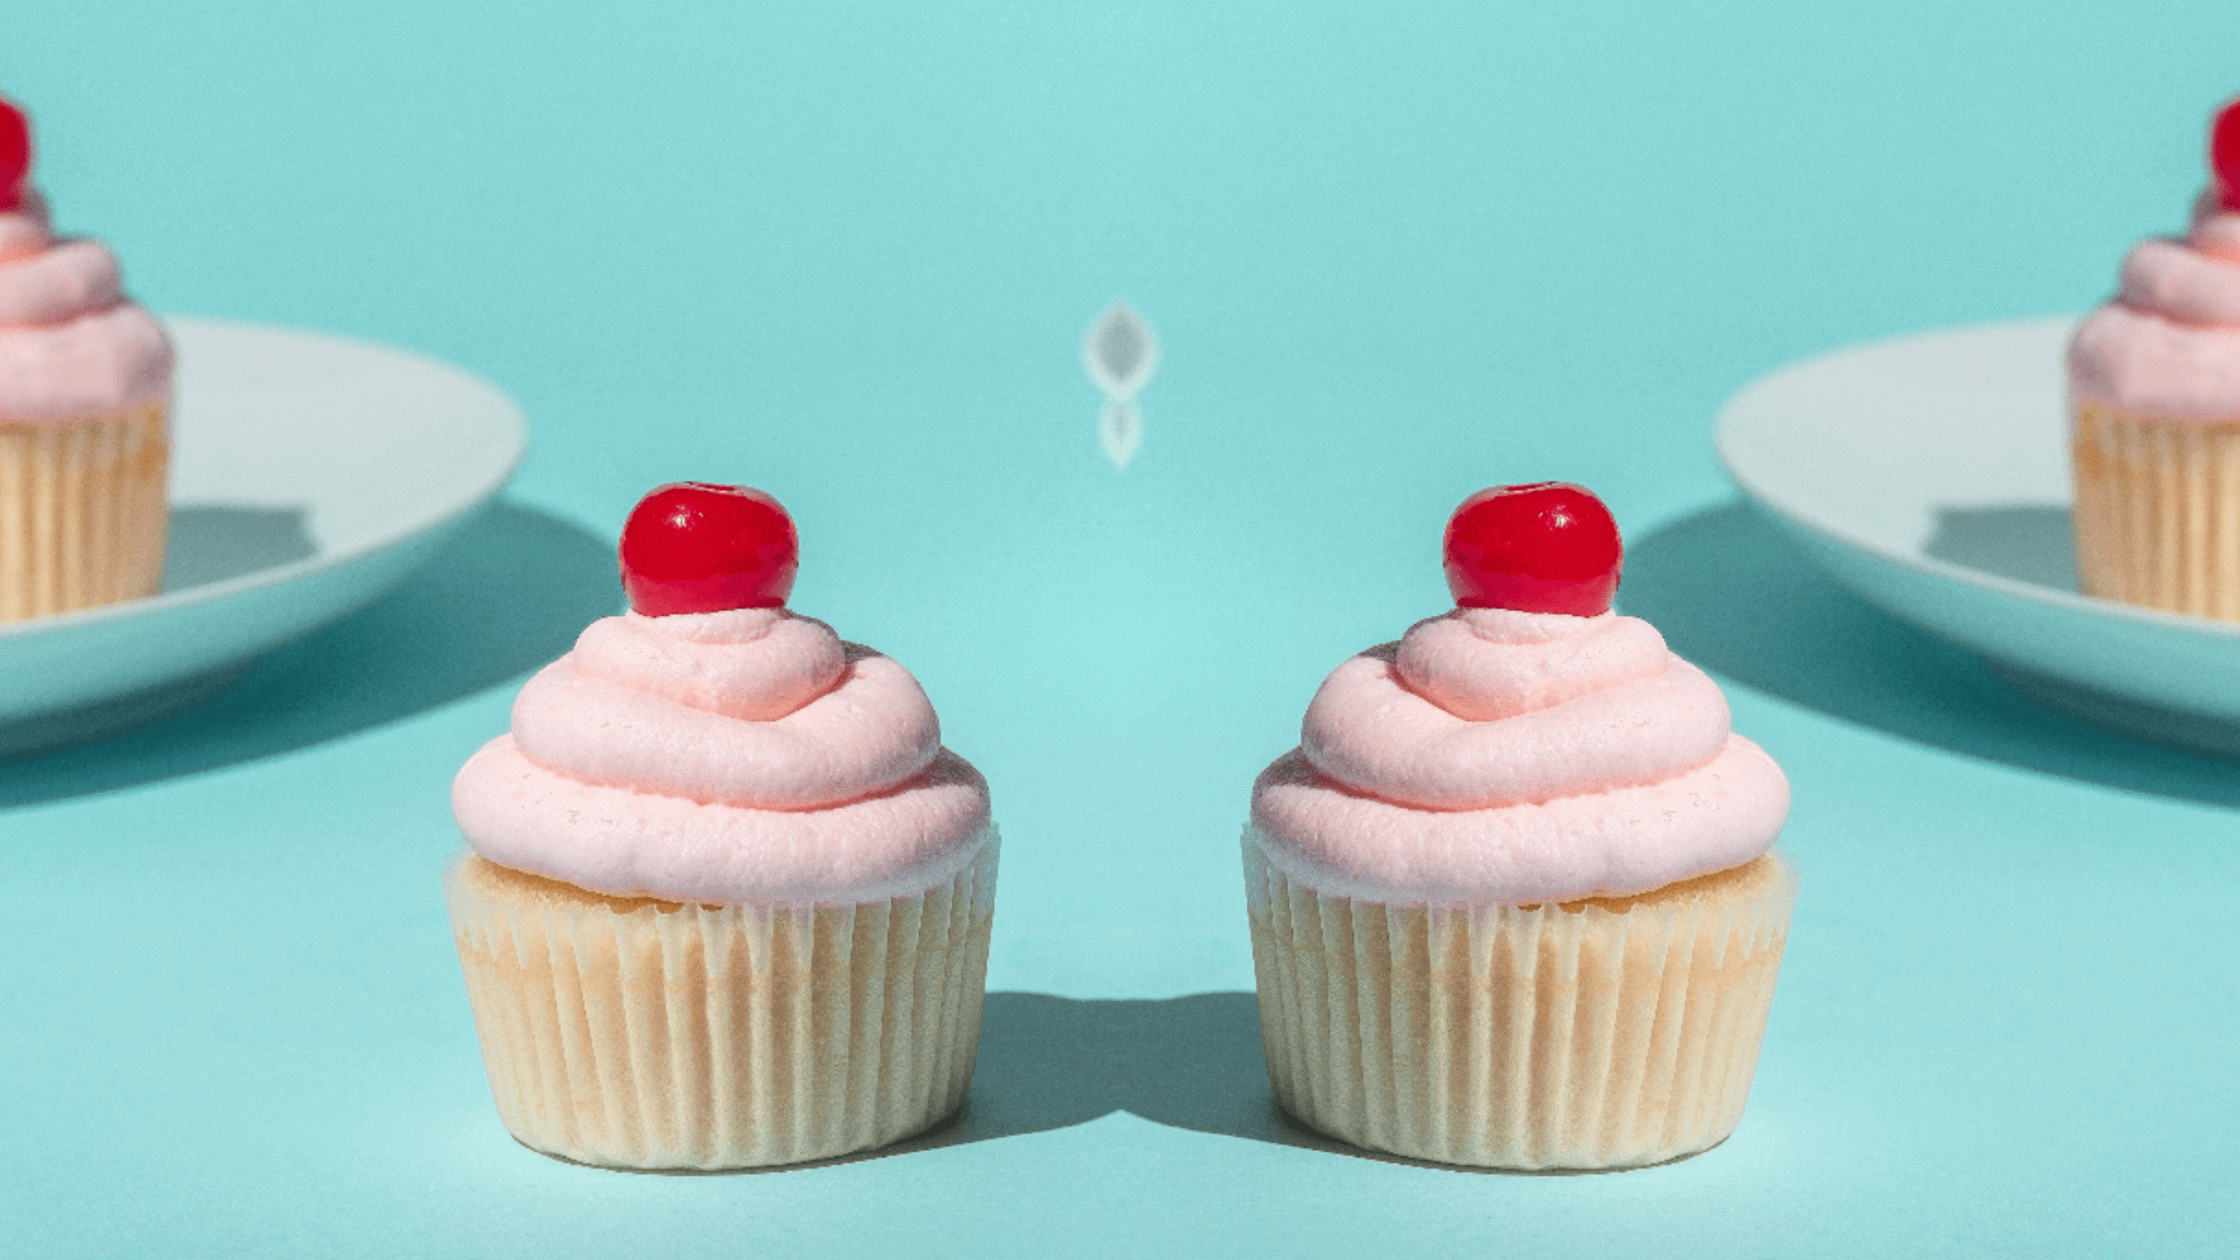 Two cupcakes that look like breasts